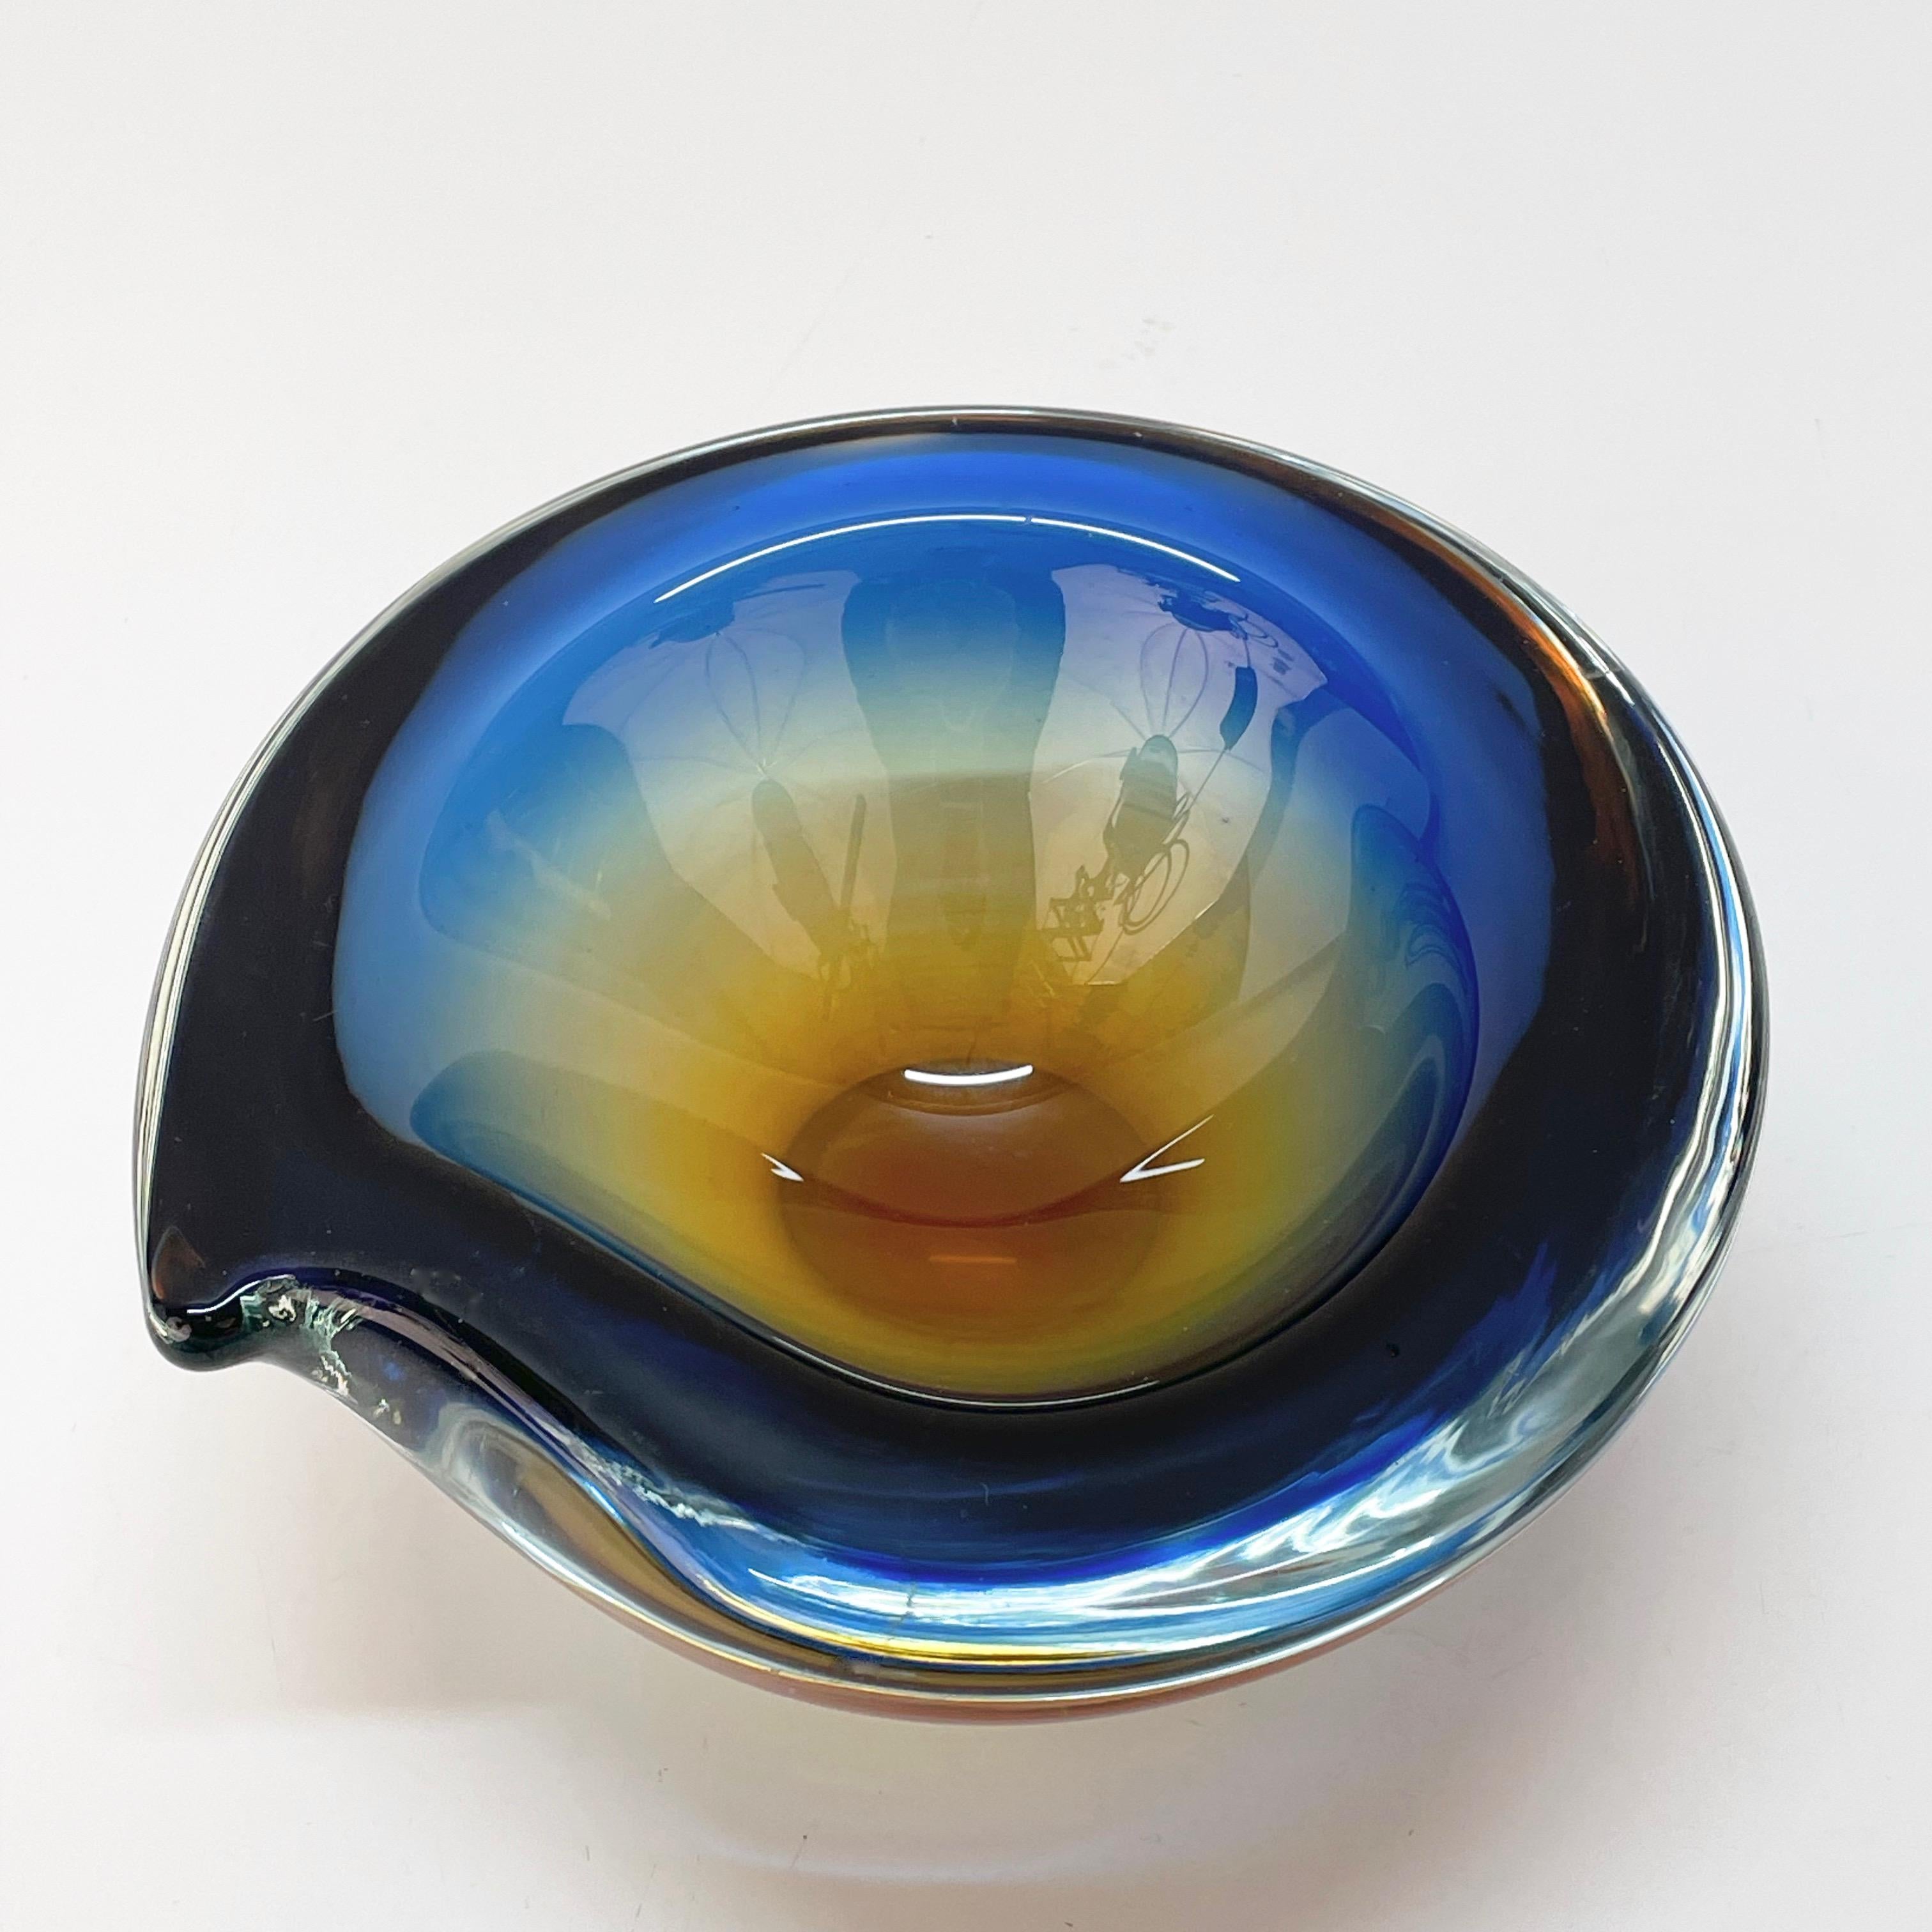 Murano Ashtray or Bowl, Flavio Poli Submerged Glass Amber Blue, Italy, 1960 For Sale 4